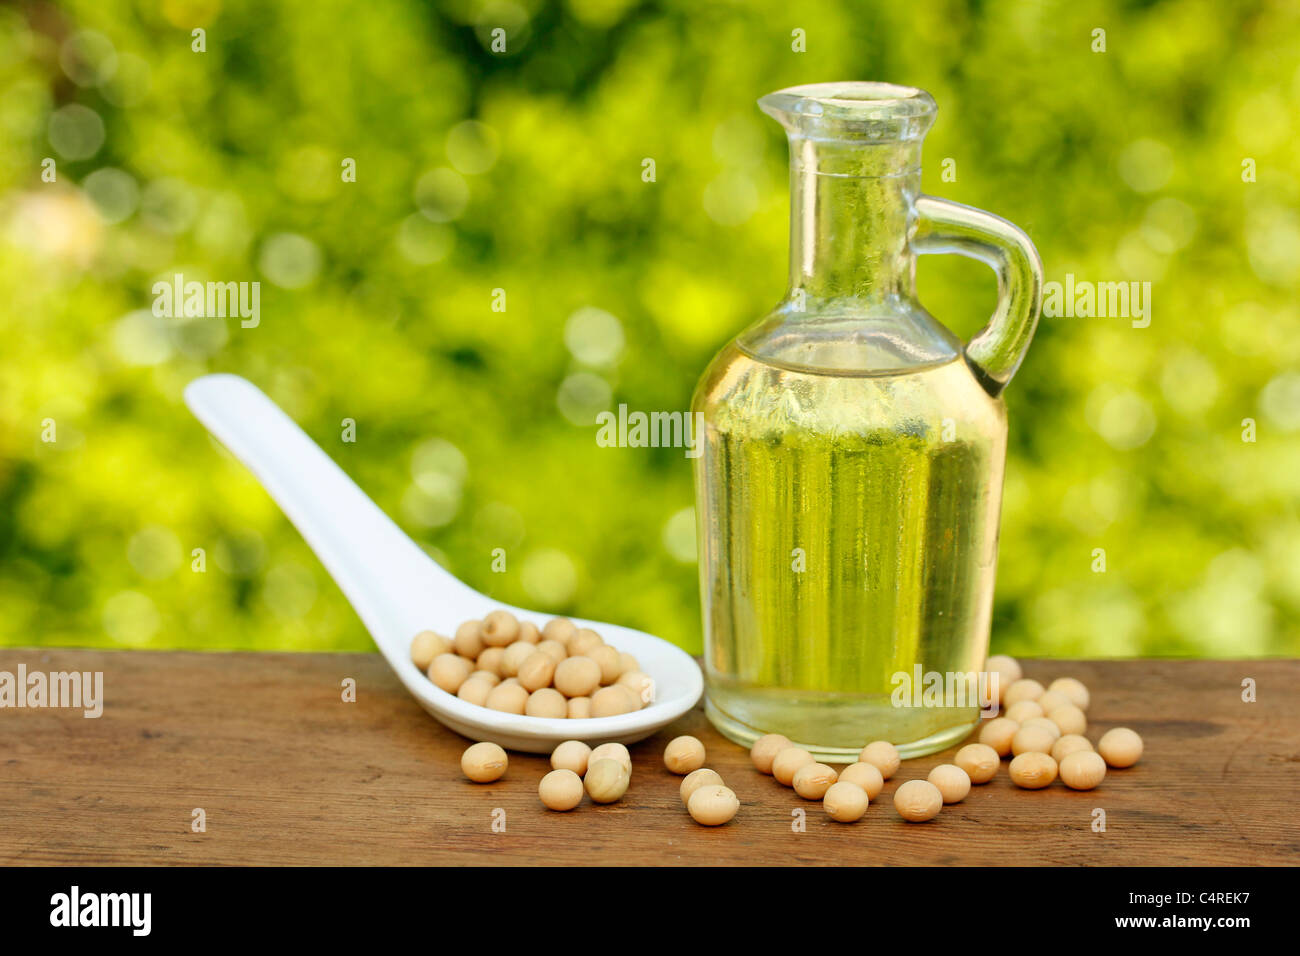 Soy beans and oil. Stock Photo